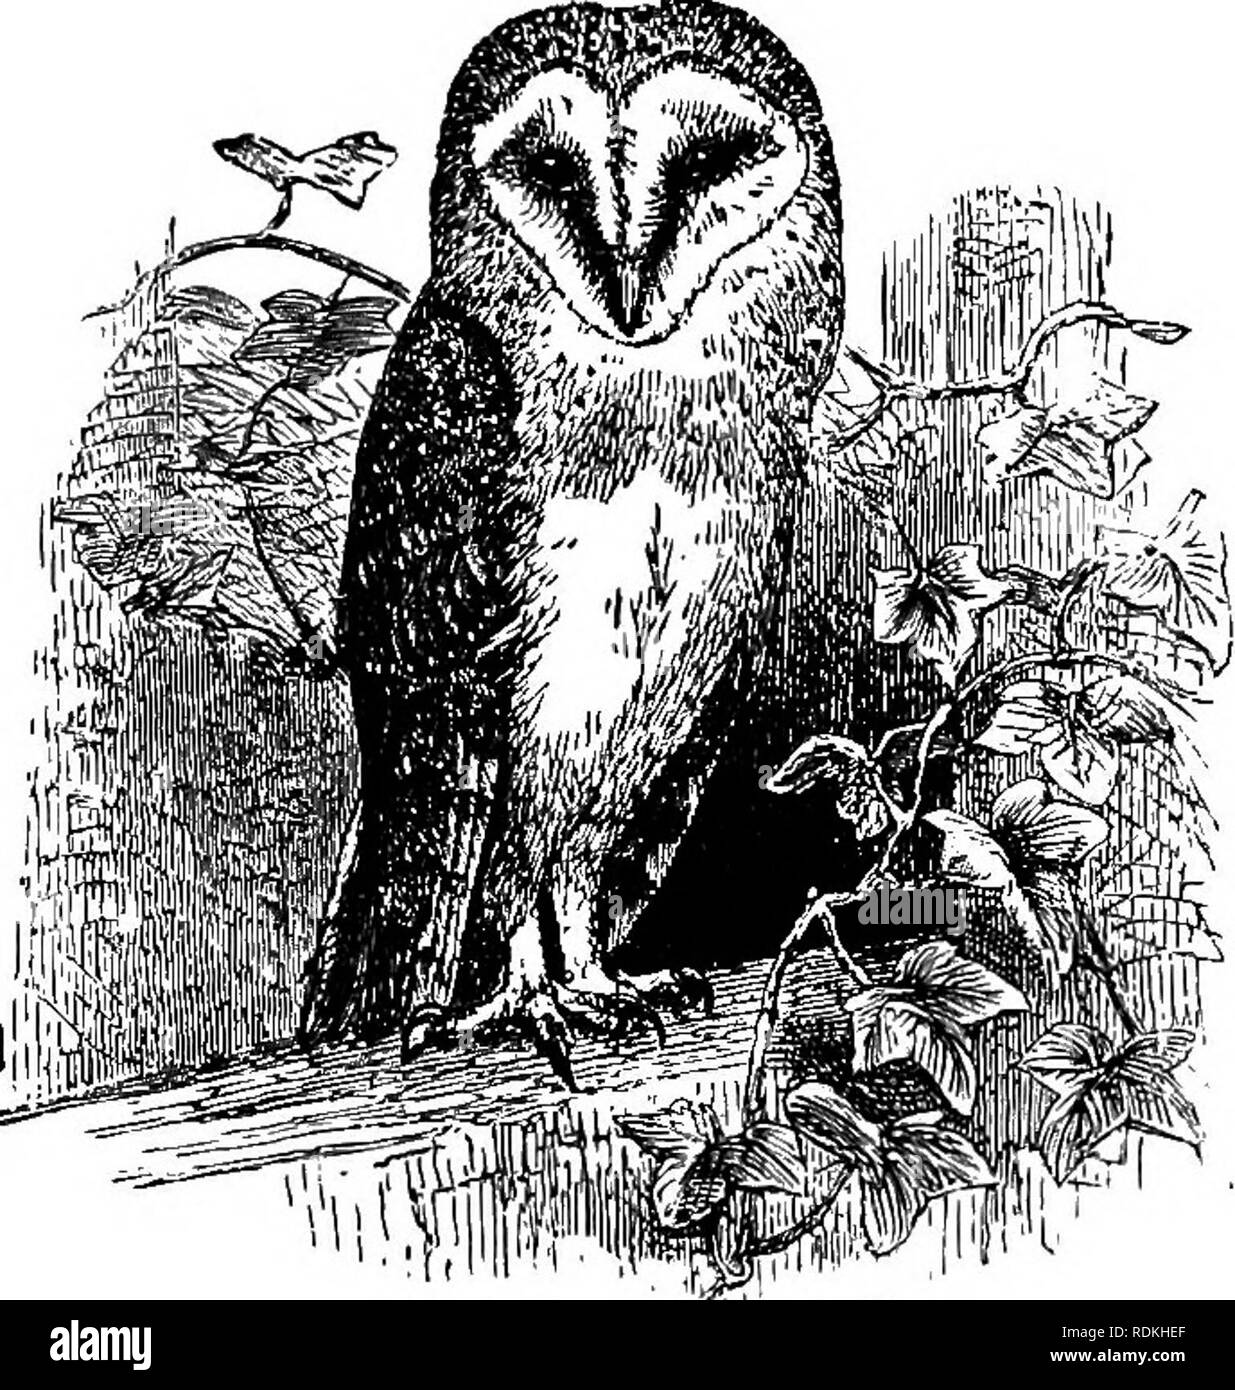 . The birds of Illinois and Wisconsin. Birds; Birds. Jan., 1909. Birds of Illinois and Wisconsin — Cory. 48s. Barn Owl. parts ranging in different specimens from pure white to buff, marked with scattered spots of brown; facial disks varying from white to tawny and bordered with buff, or in some cases dark brown; a brown spot in front of the eye; primaries, tawny, shading to white on the inner webs and banded with dark brown; tail, varying from white to tawny, usually mottled and banded with brown; iris, black. Length, 15 to 20; wing, 12,25 to 13.75; bill, .95; tarsus, about 2.60. The Barn Owl  Stock Photo